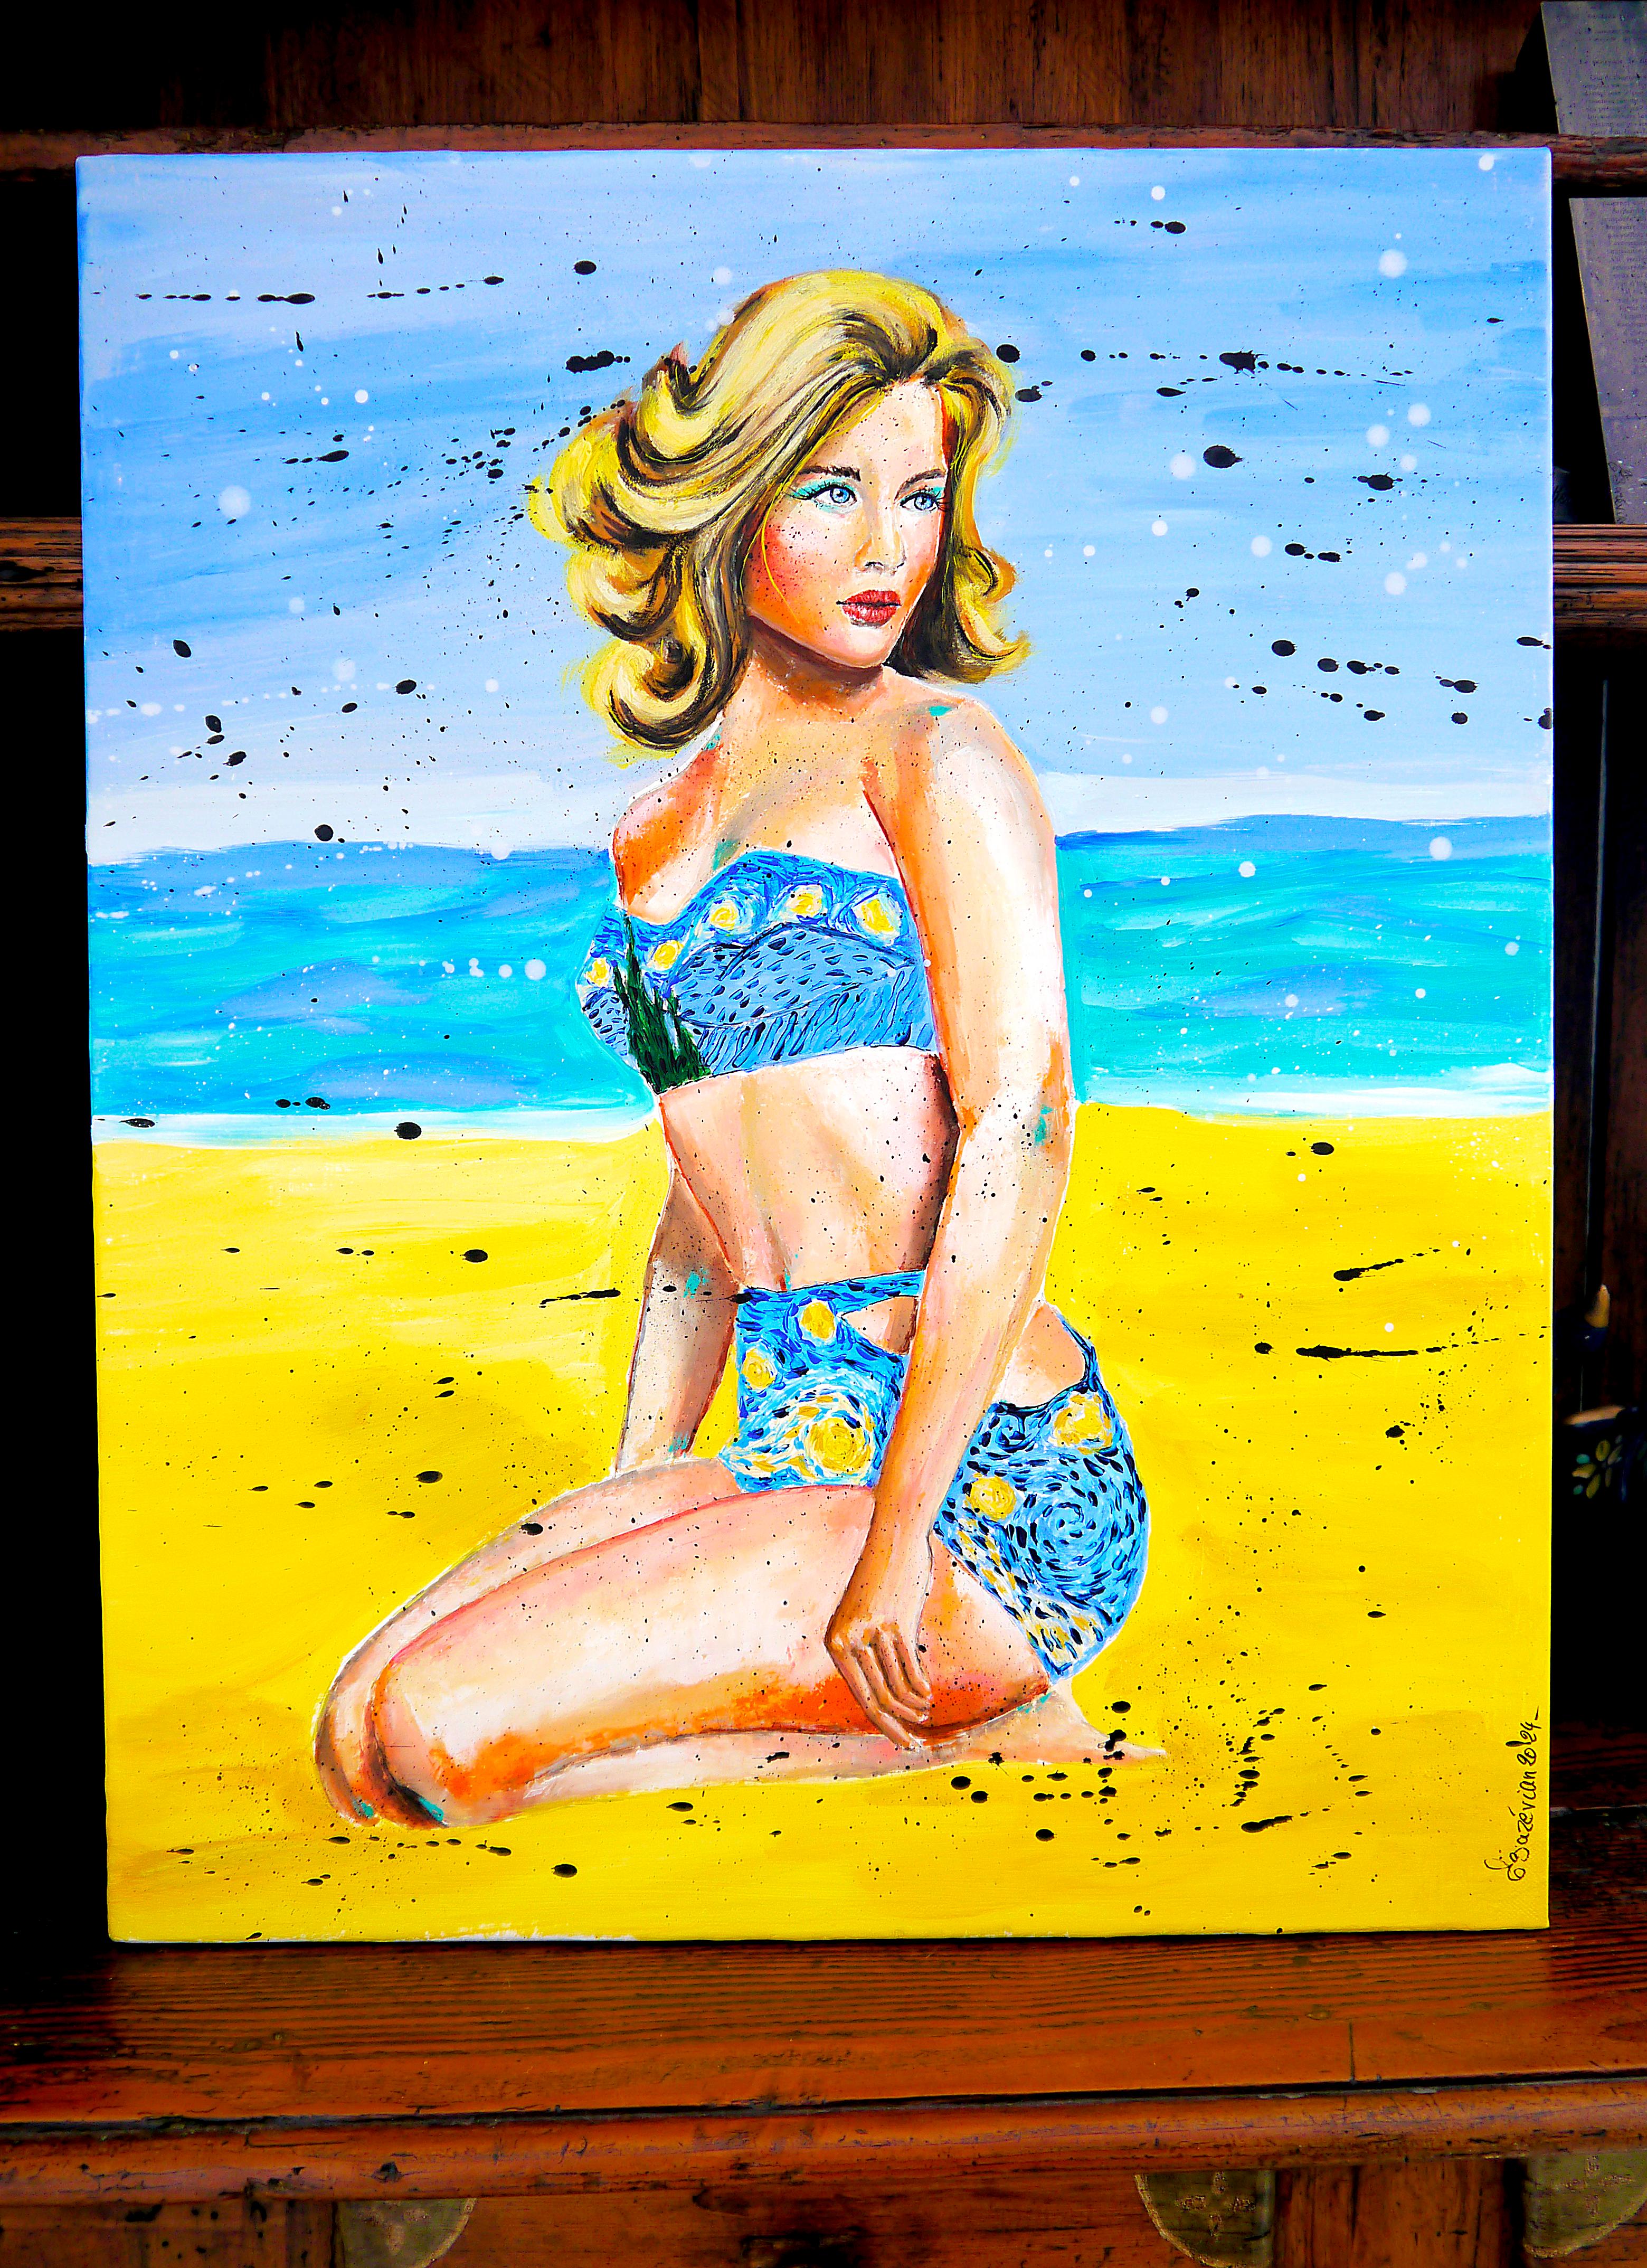 PS 240 Van Gogh Starry night Girl Summer in La Baule

Portrait of a woman with Van Gogh (The Starry night) swim dress. 

Structural analysis:
Such as Impressionist painting,   the subject is firstly a study of light on human body, creating high